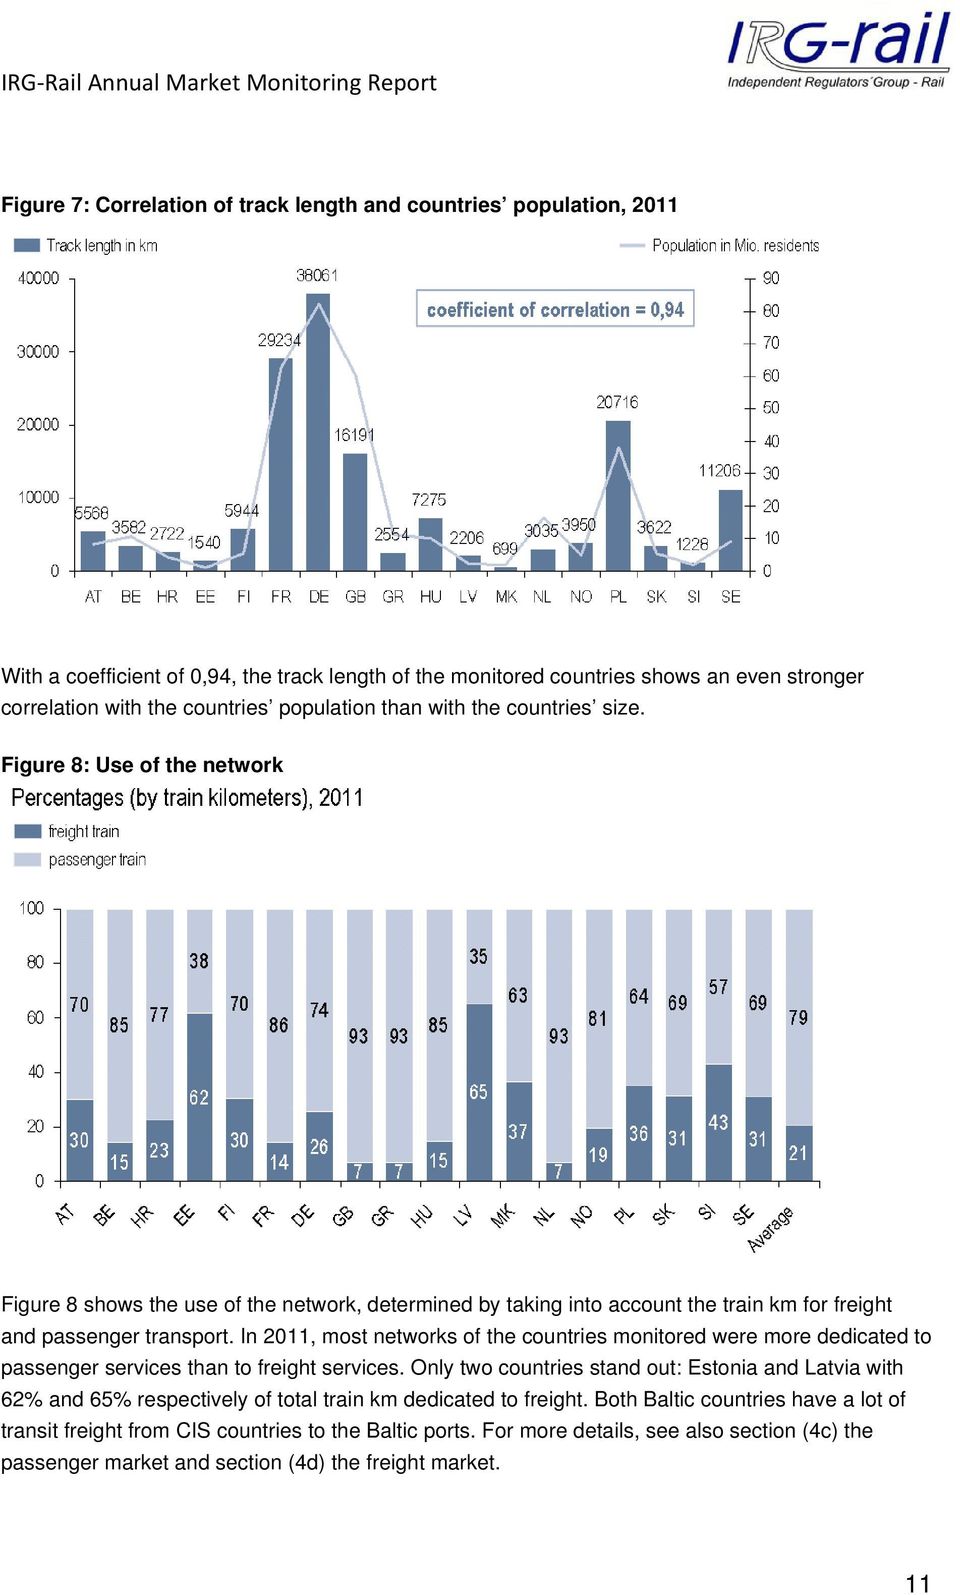 In 2011, most networks of the countries monitored were more dedicated to passenger services than to freight services.